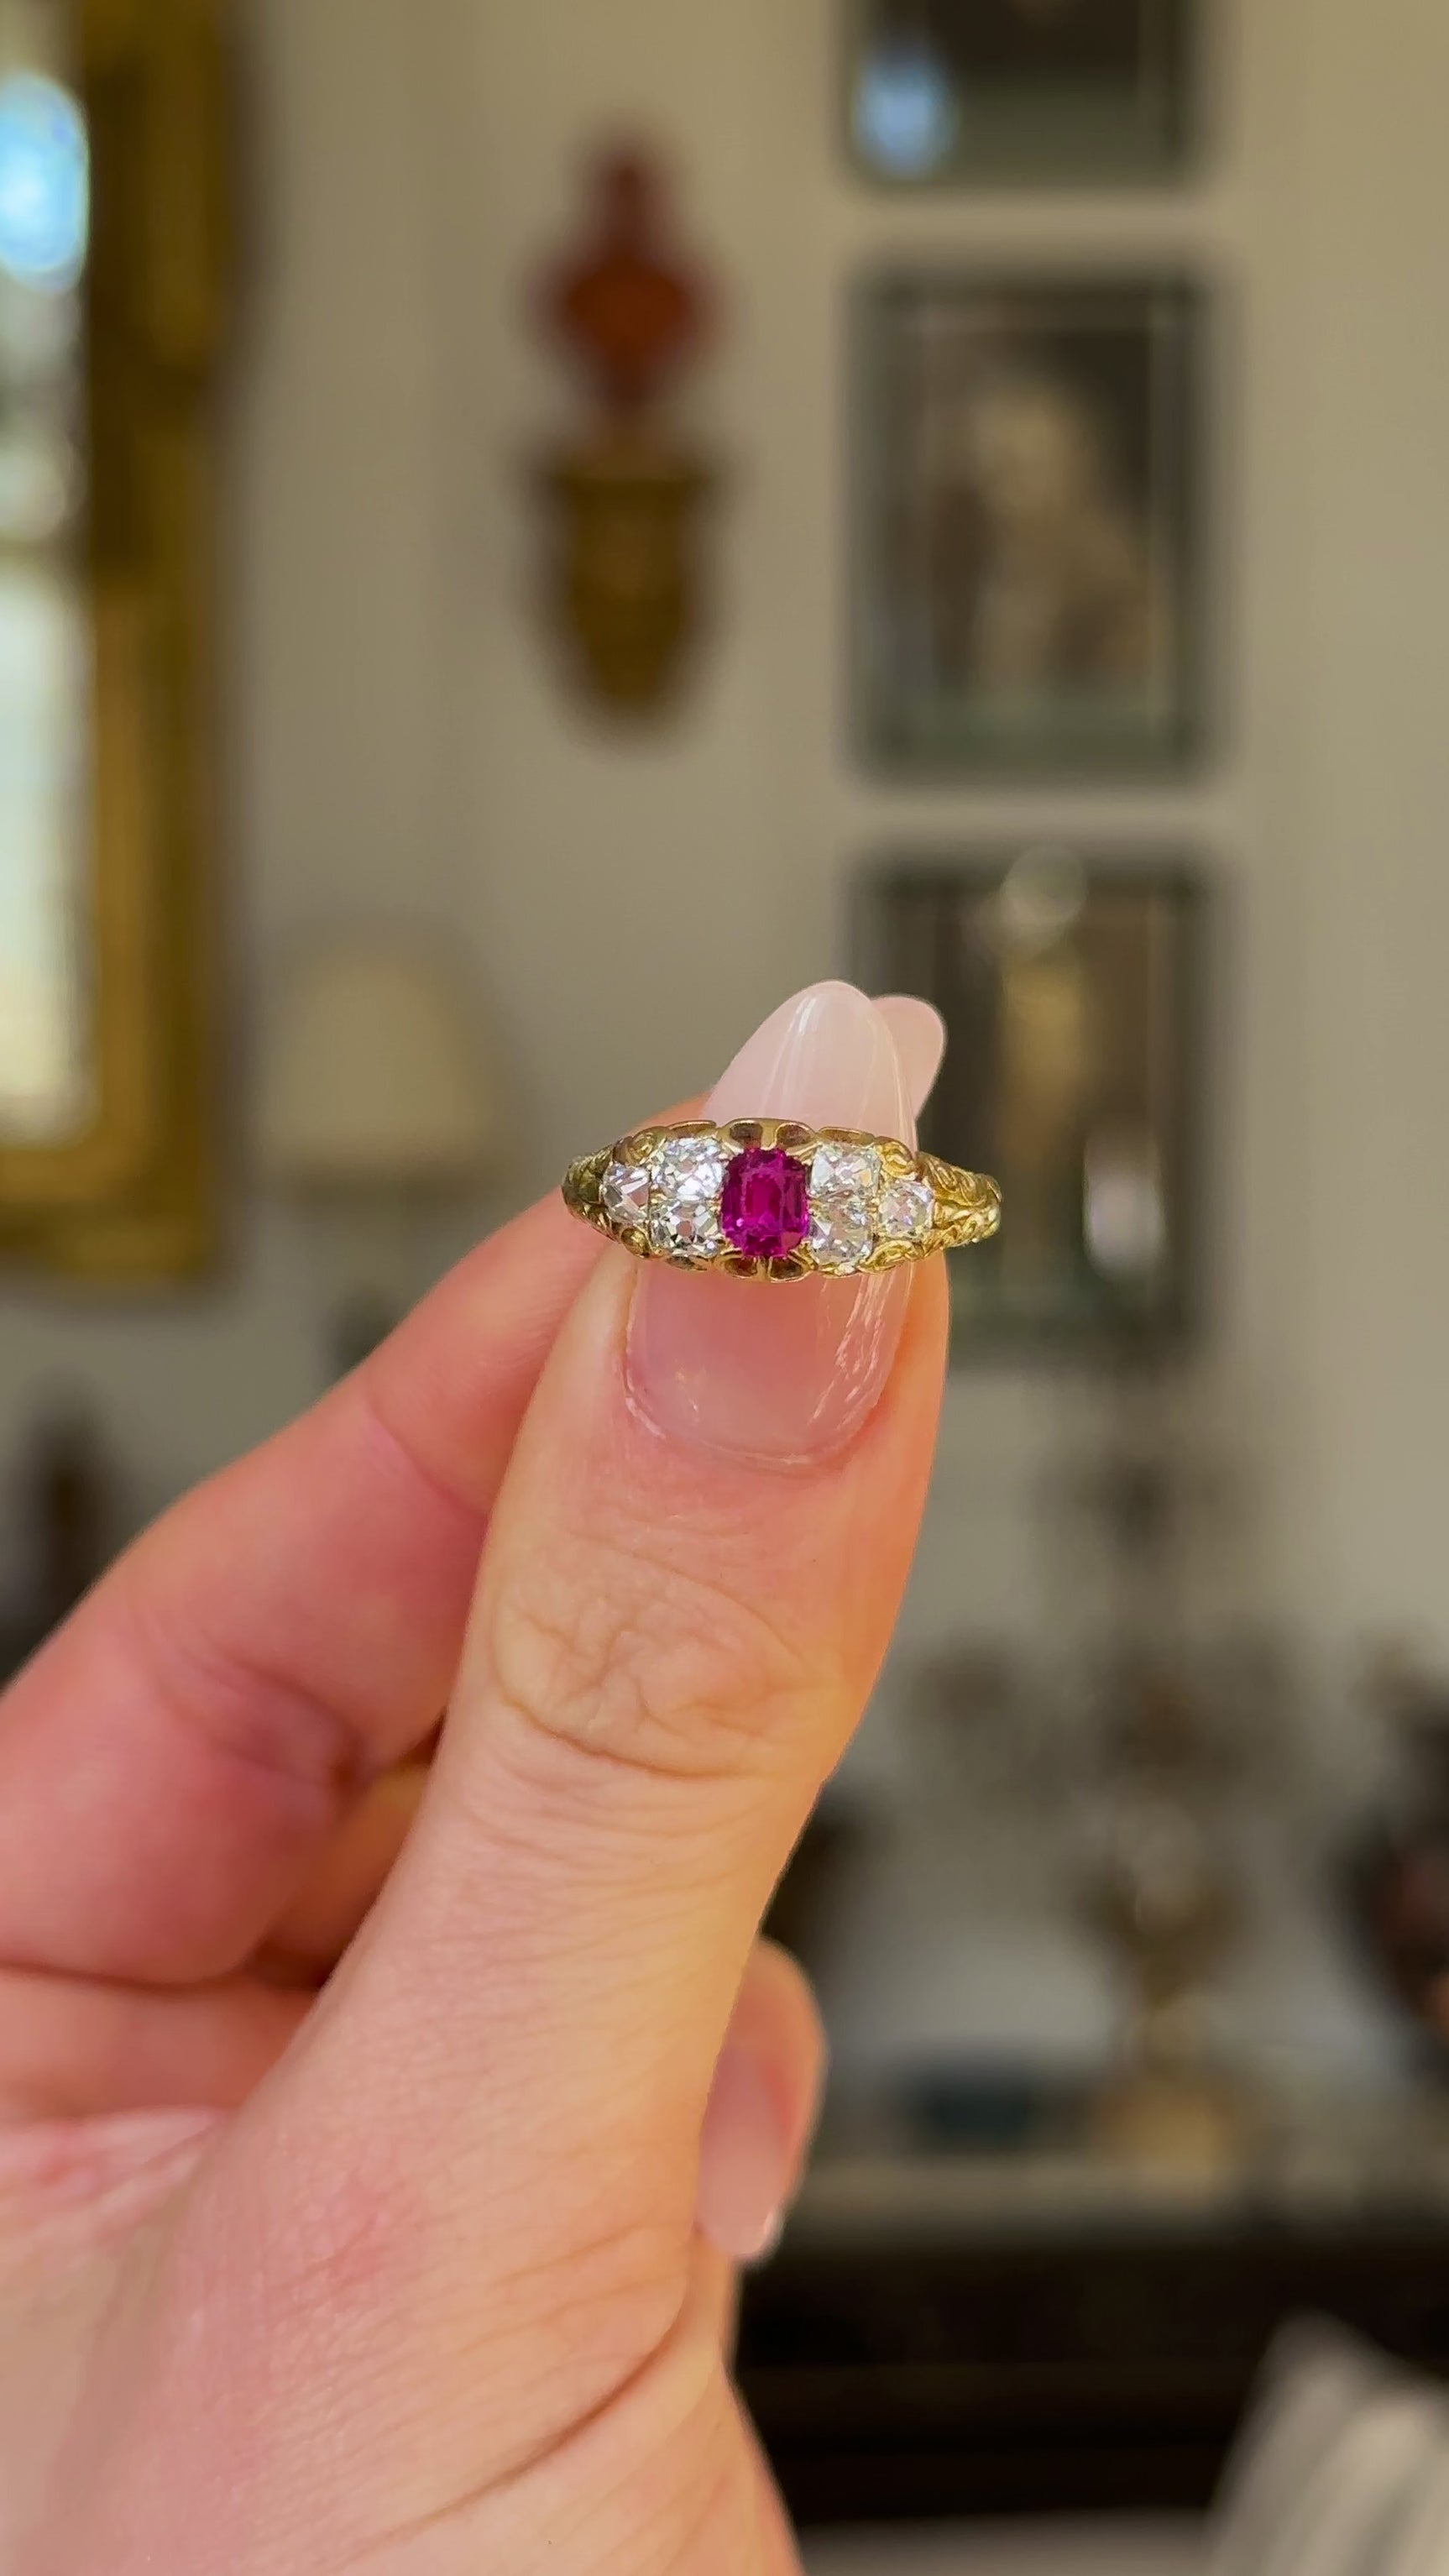 Antique, Victorian Burmese Ruby and Diamond Engagement Ring, 18ct Yellow Gold held in fingers and rotated to give perspective.